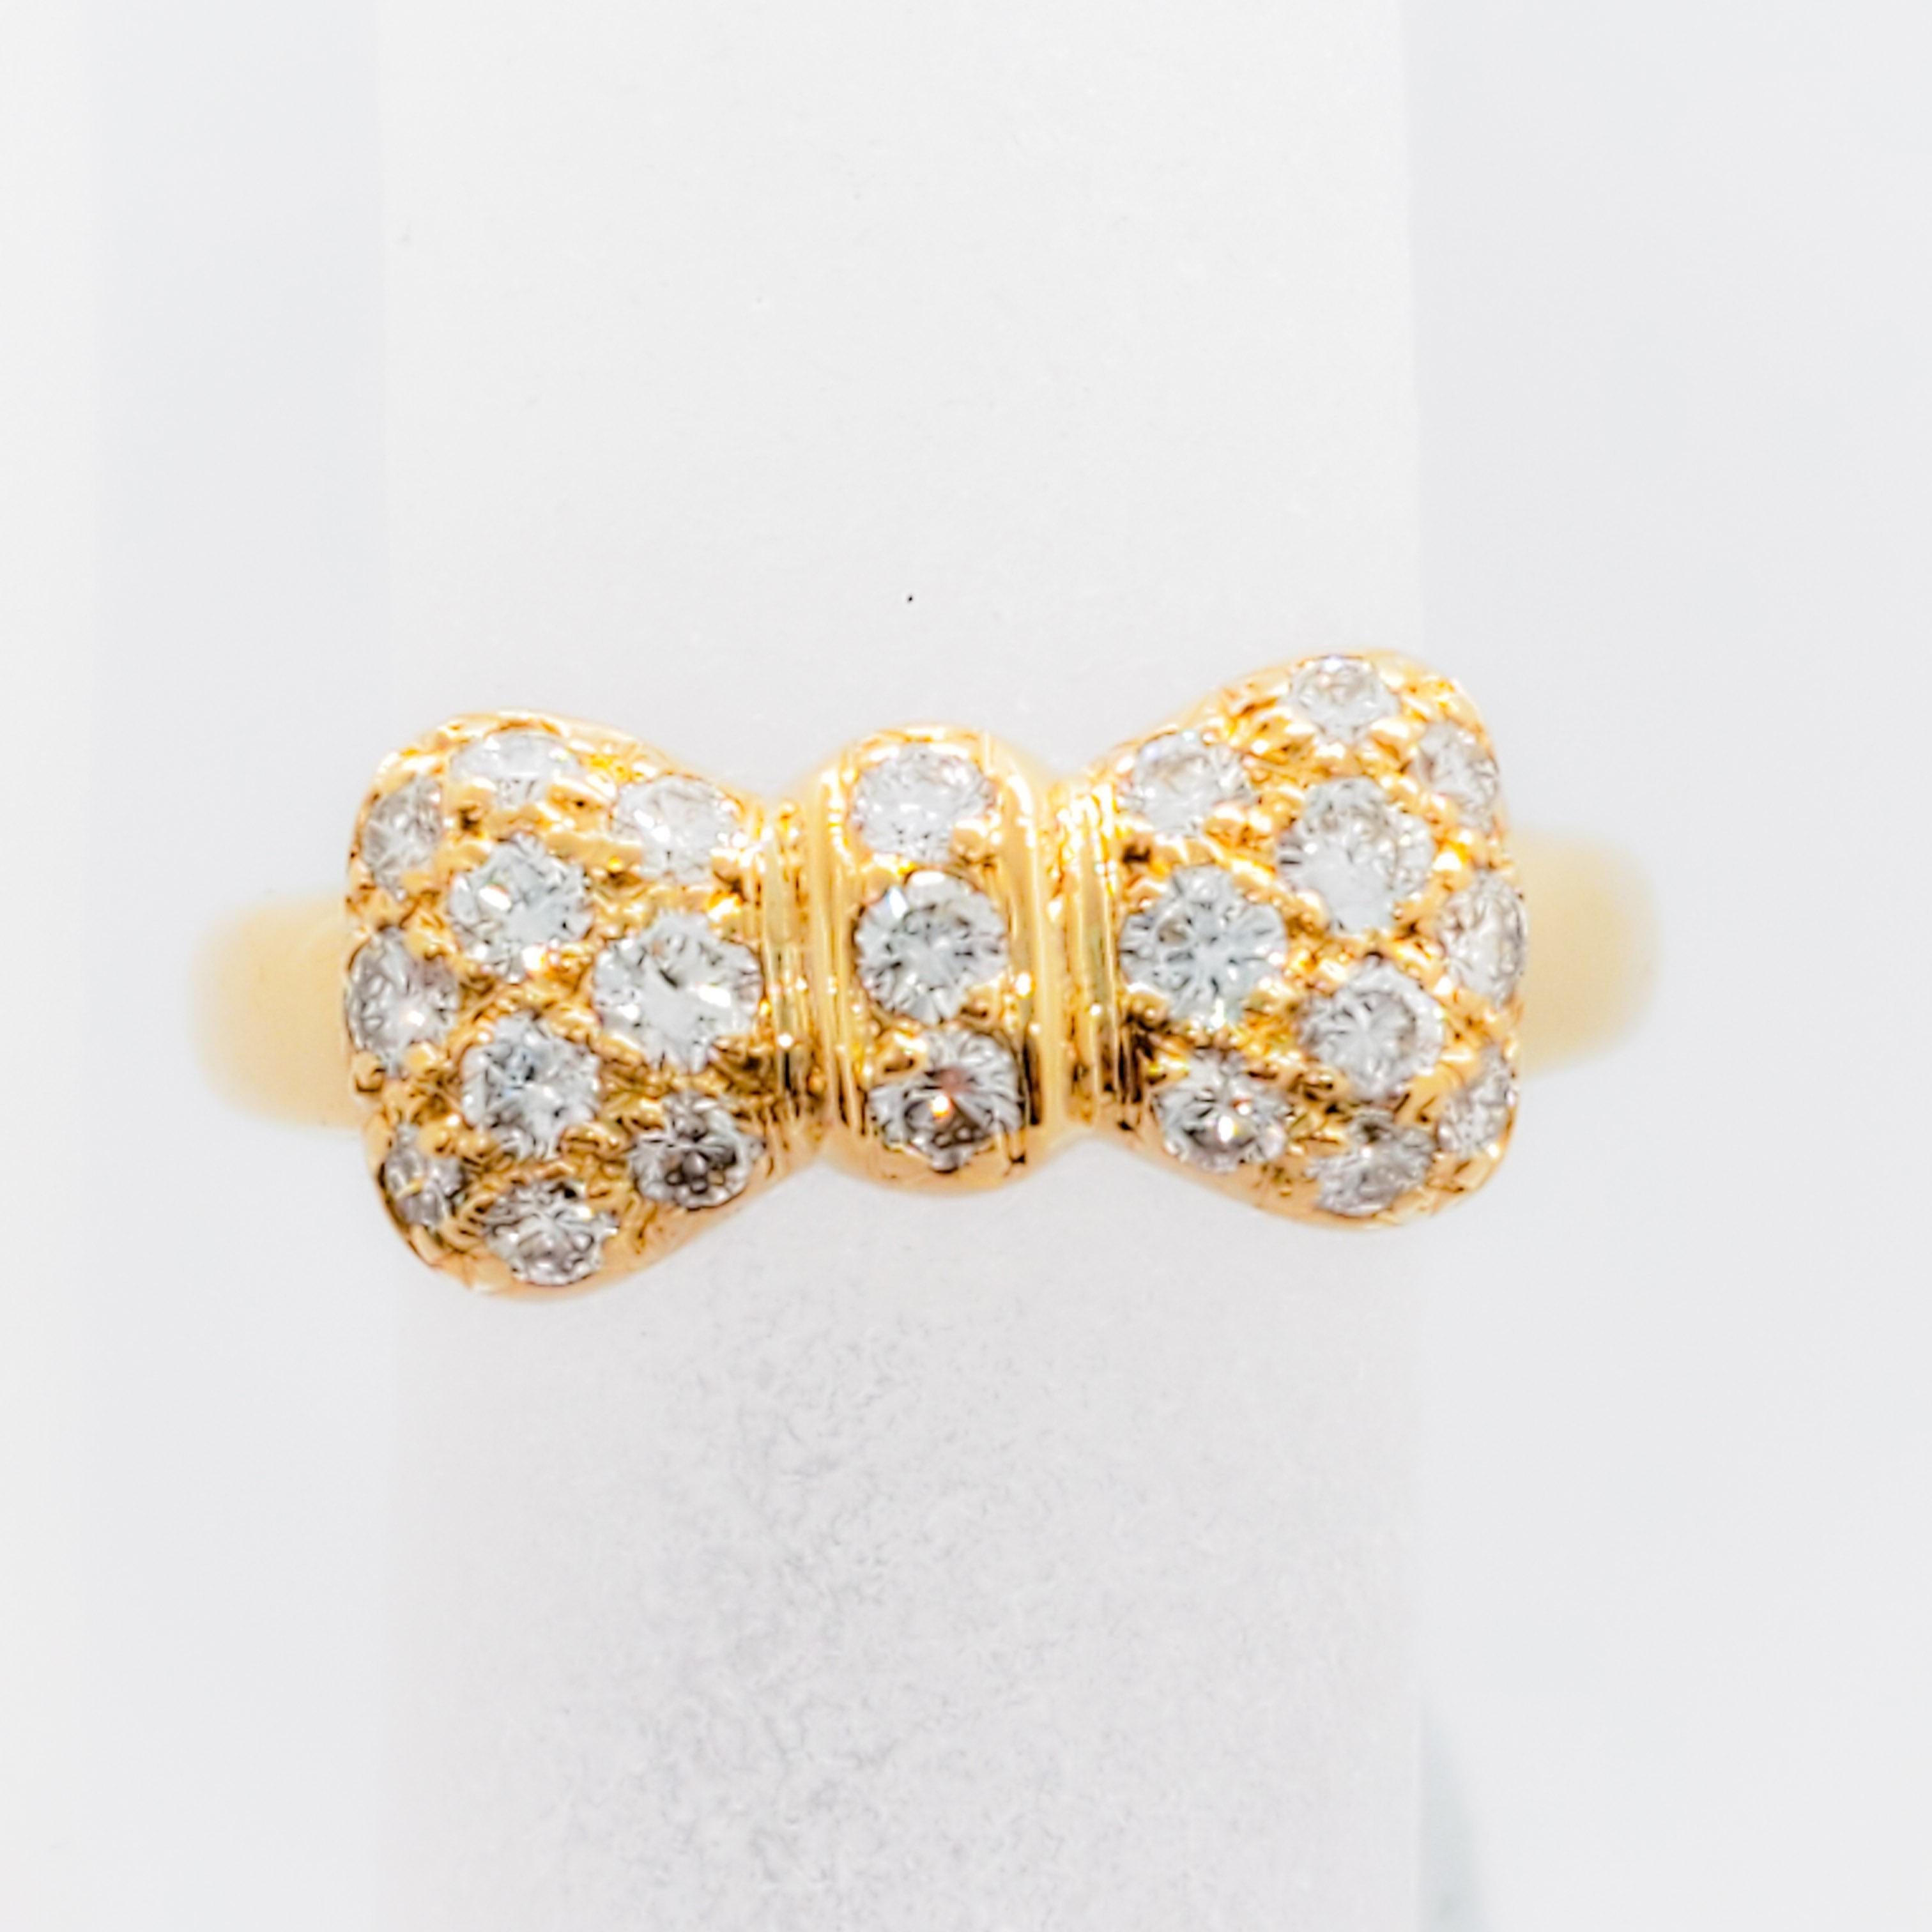 Gorgeous estate diamond ring from designer Van Cleef & Arpels.  This ring is made with 0.18 cts of good quality, white, and bright diamond rounds in a bow design.  Size 5.  Excellent condition.